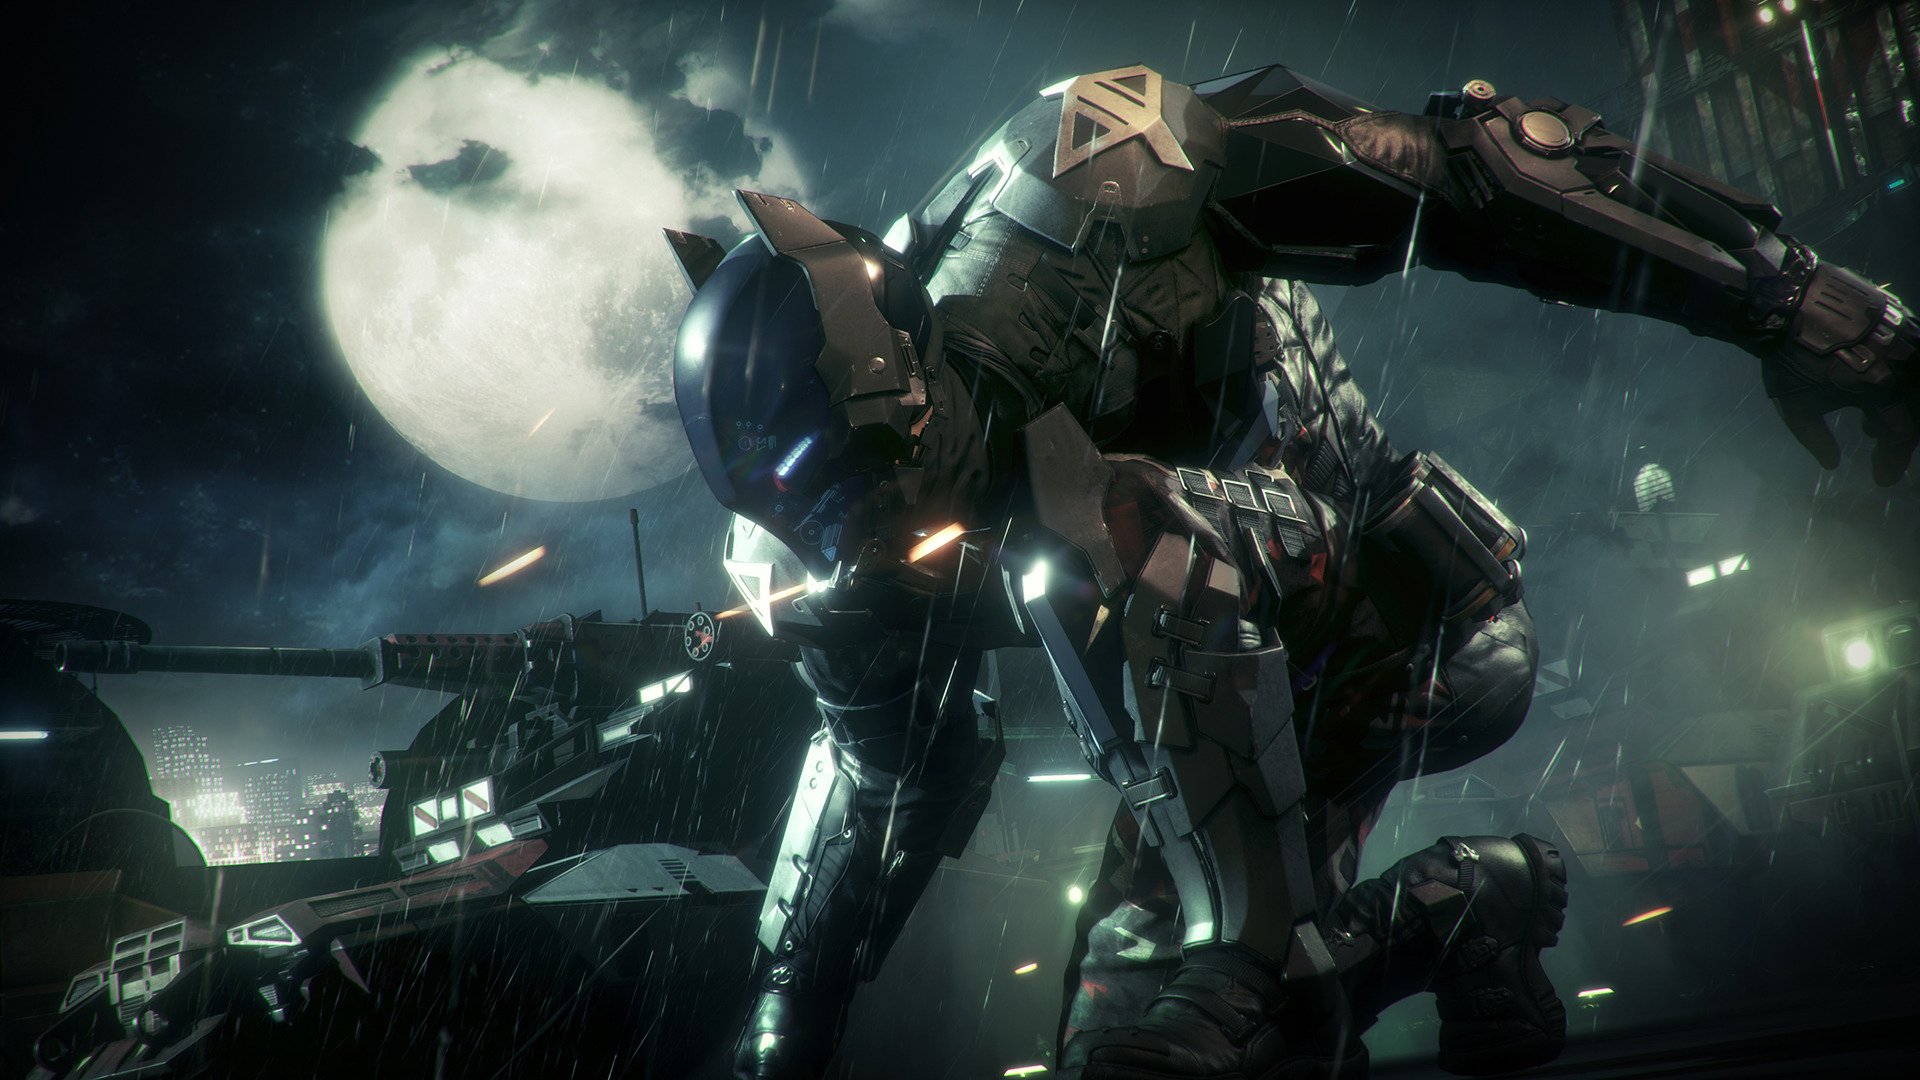 The Future of Batman after Arkham Knight - The Game Is Never Over